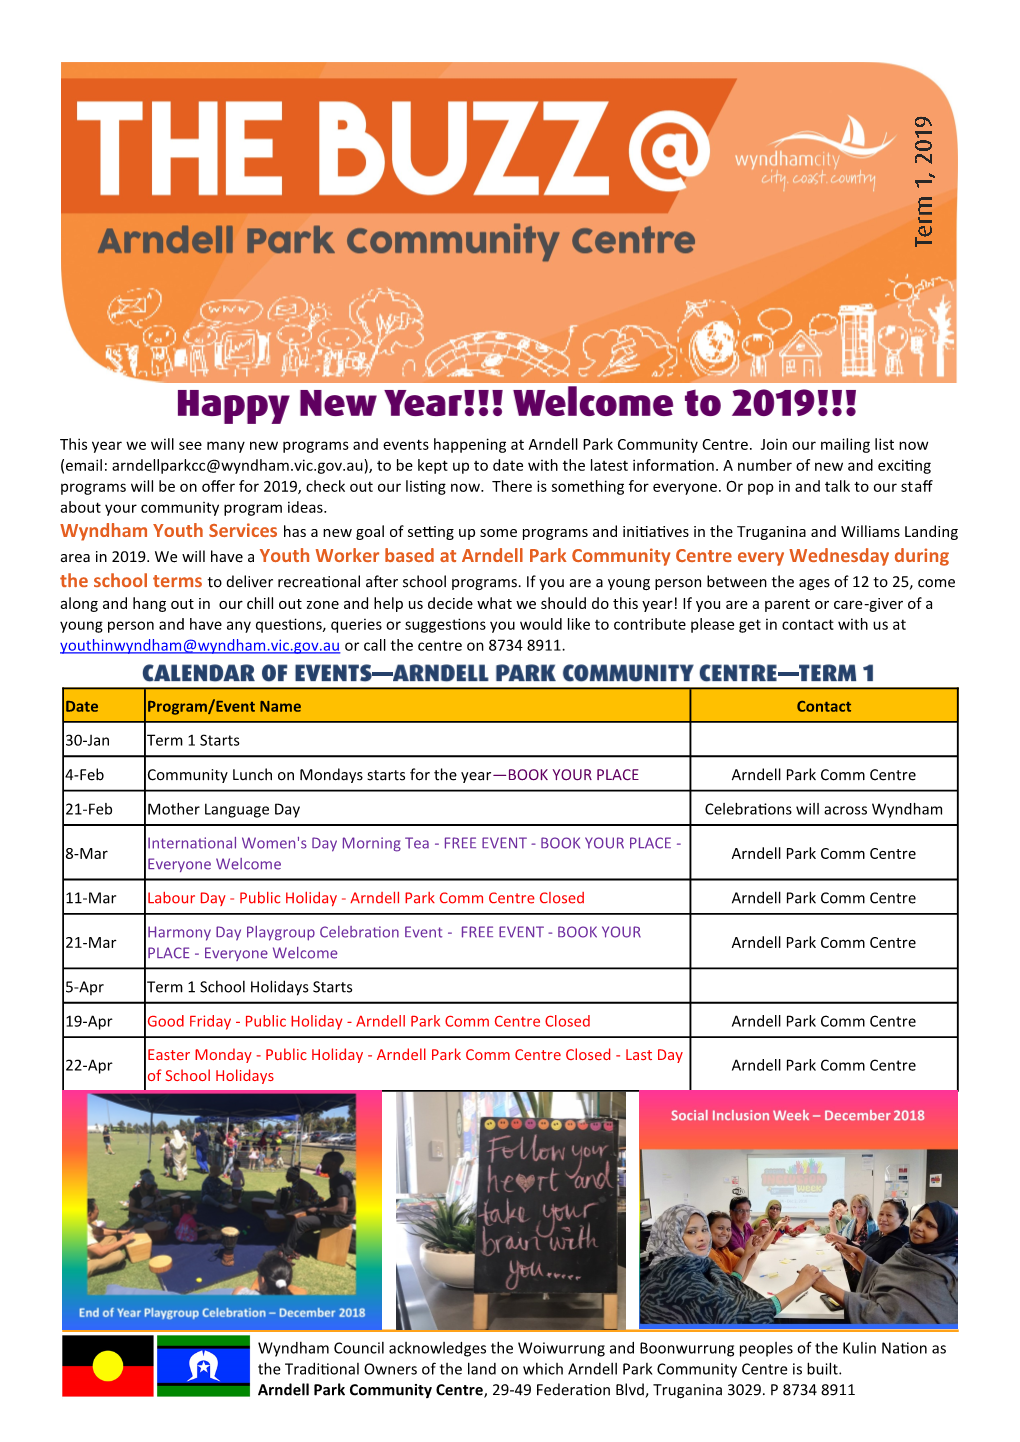 Area in 2019. We Will Have a Youth Worker Based at Arndell Park Community Centre Every Wednesday During the School Terms to Deliver Recreational After School Programs